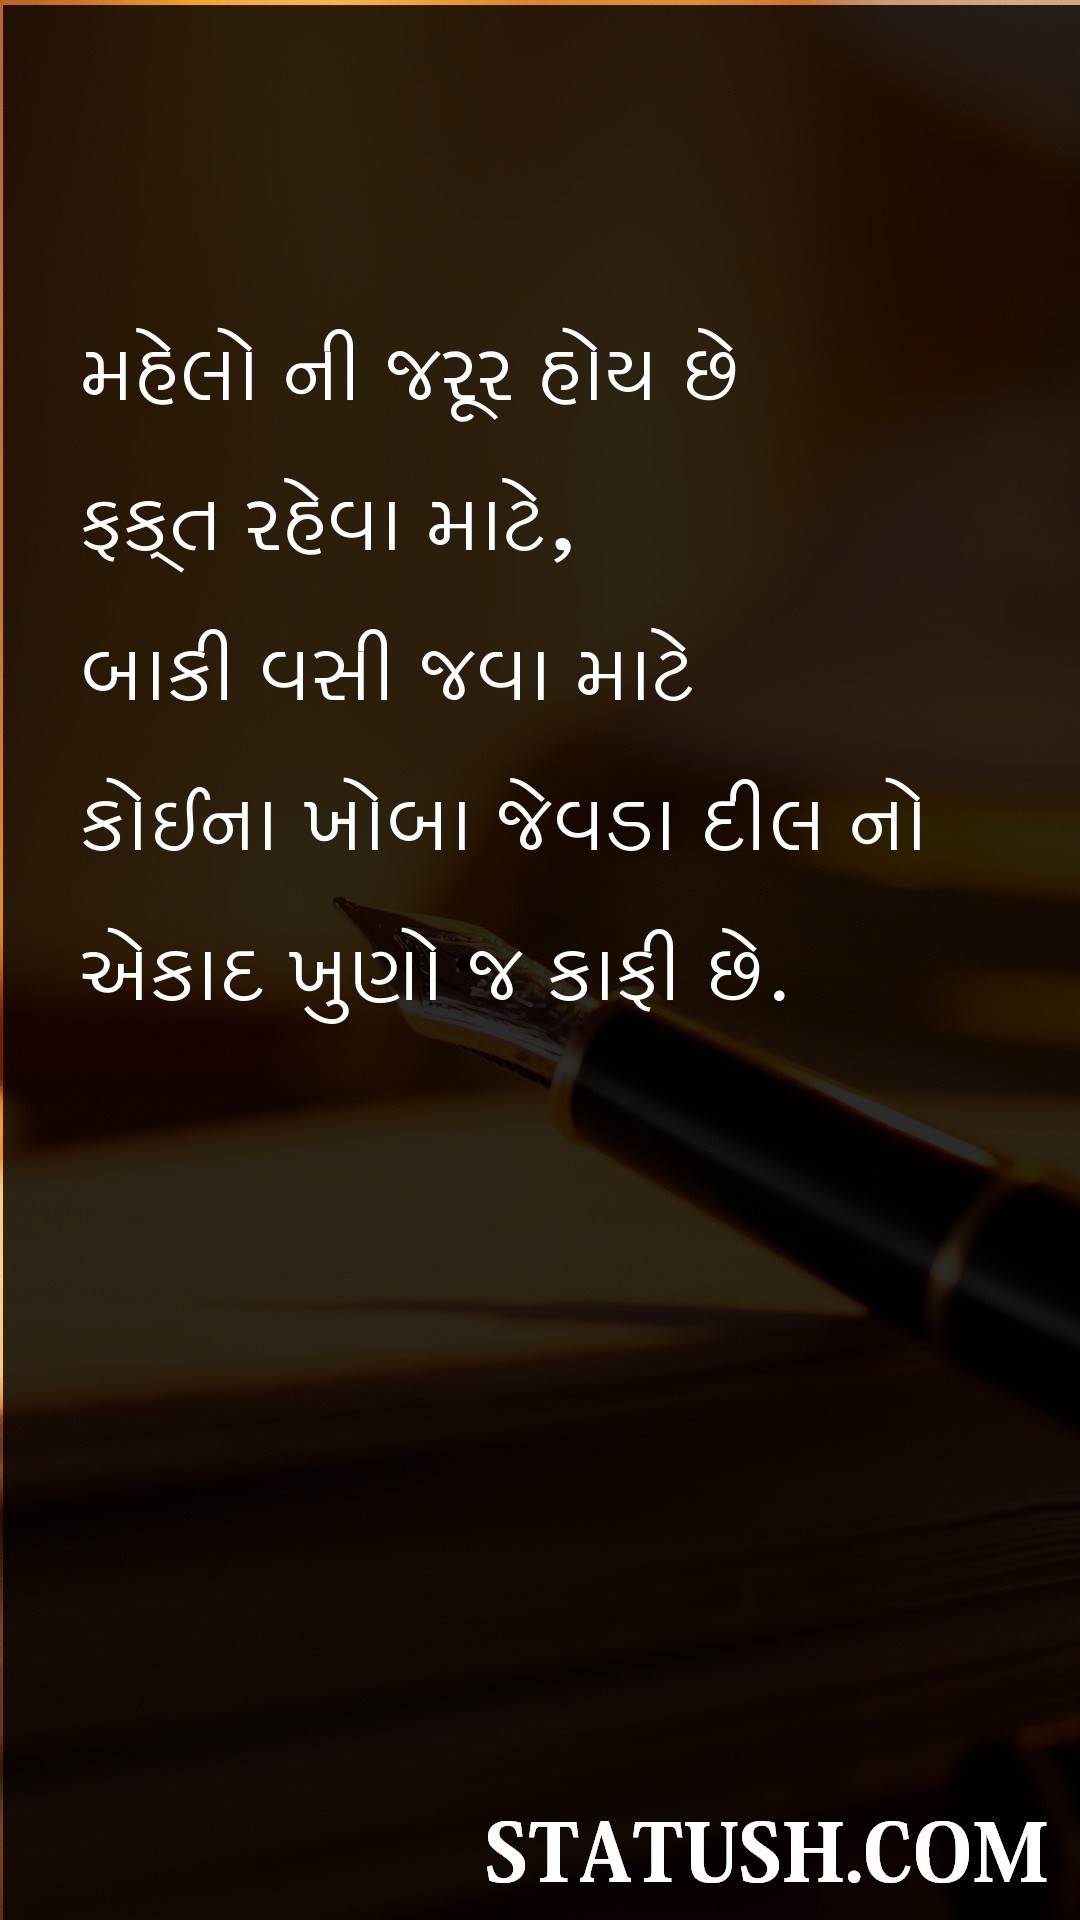 Palaces are needed Gujarati Quotes at statush.com